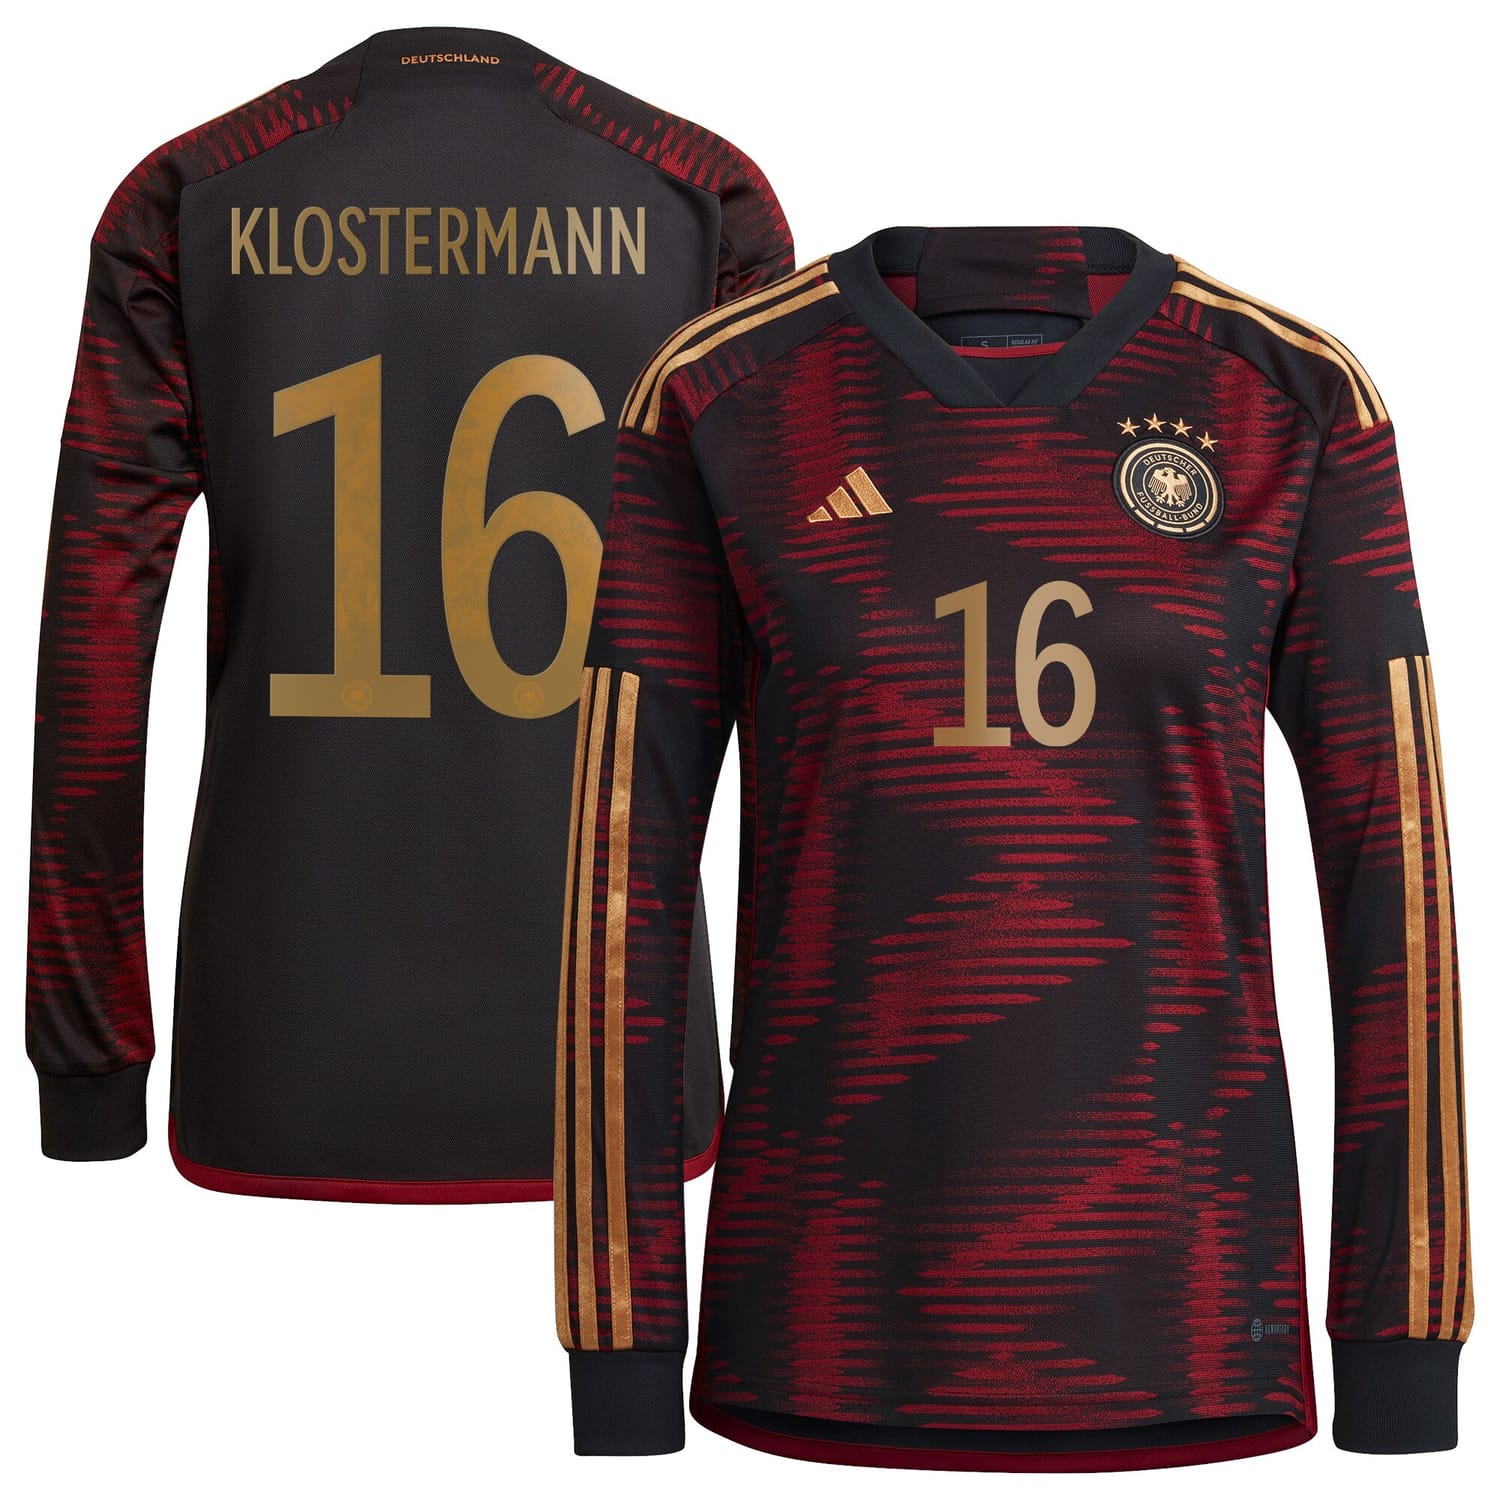 Germany National Team Away Jersey Shirt Long Sleeve player Lukas Klostermann 16 printing for Women